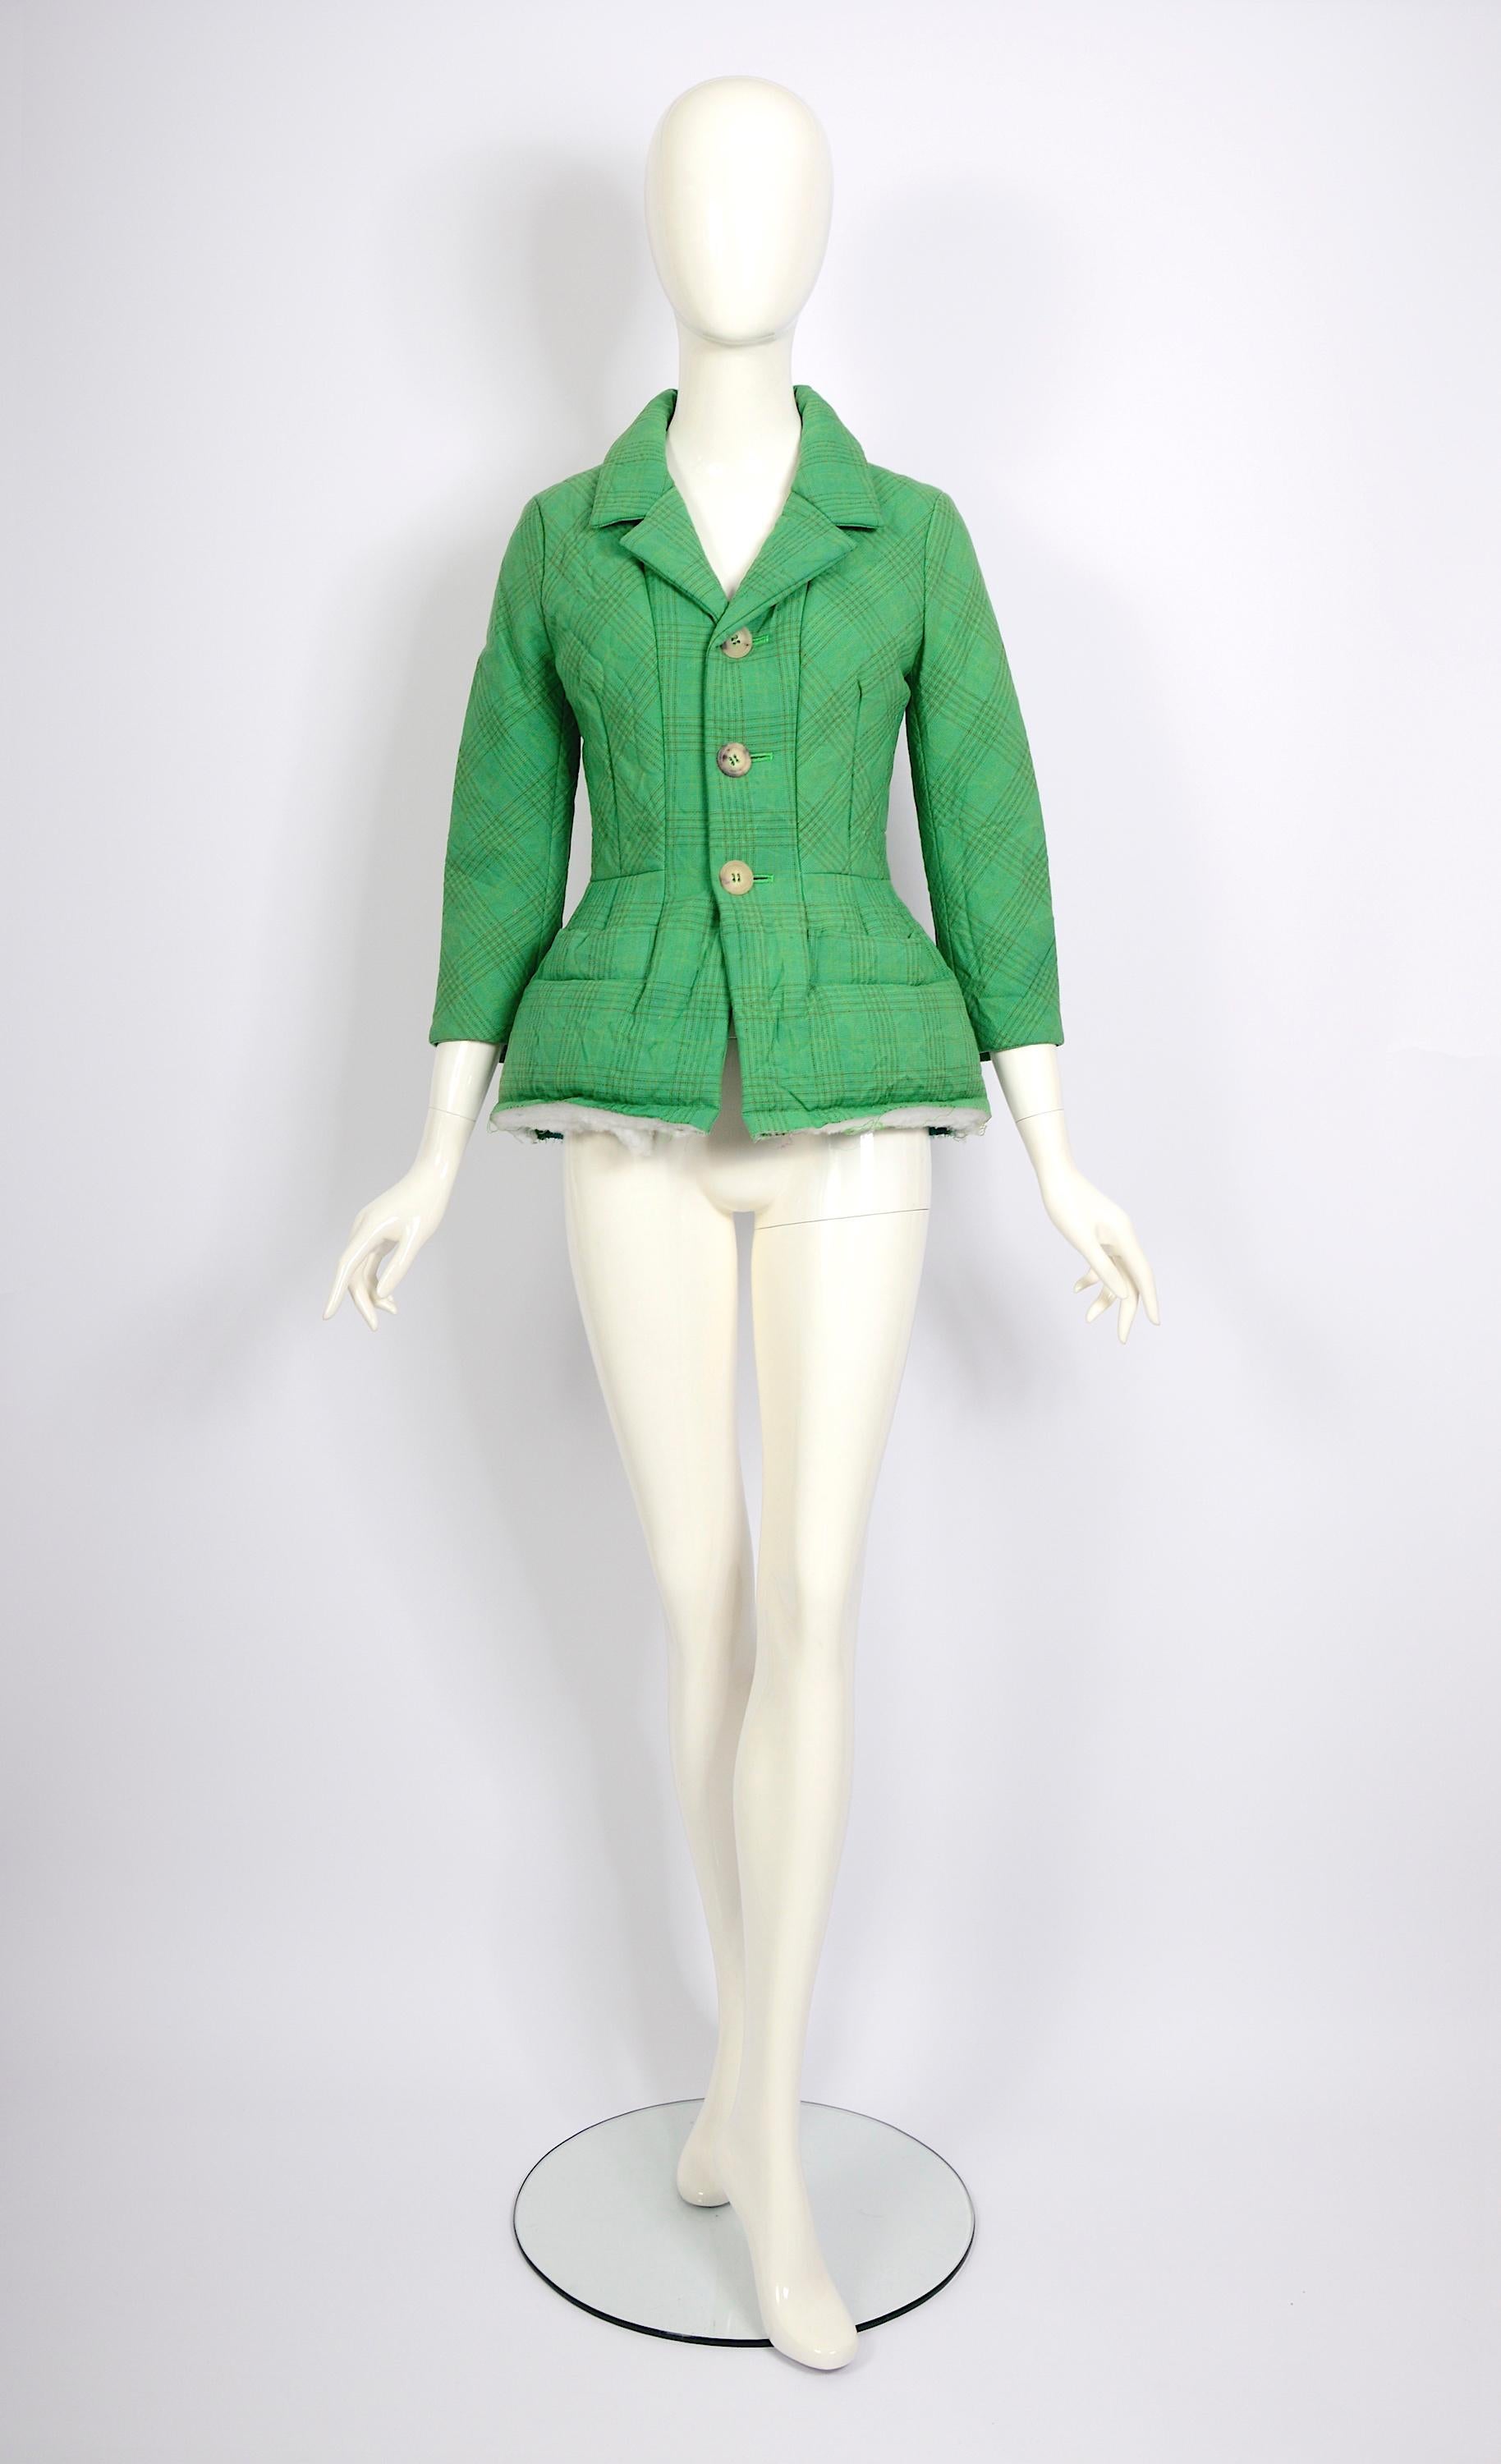 Junya Watanabe Comme des Garcons green wool jacket with a deconstructed hem.
2004 collection
Size S made in Japan
Measurements taken flat:
Ua to Ua 18inch/46cm(x2) - Waist 15inch/38cm(x2) - Sleeve 20inch/51cm - Total Length 26inch/66cm